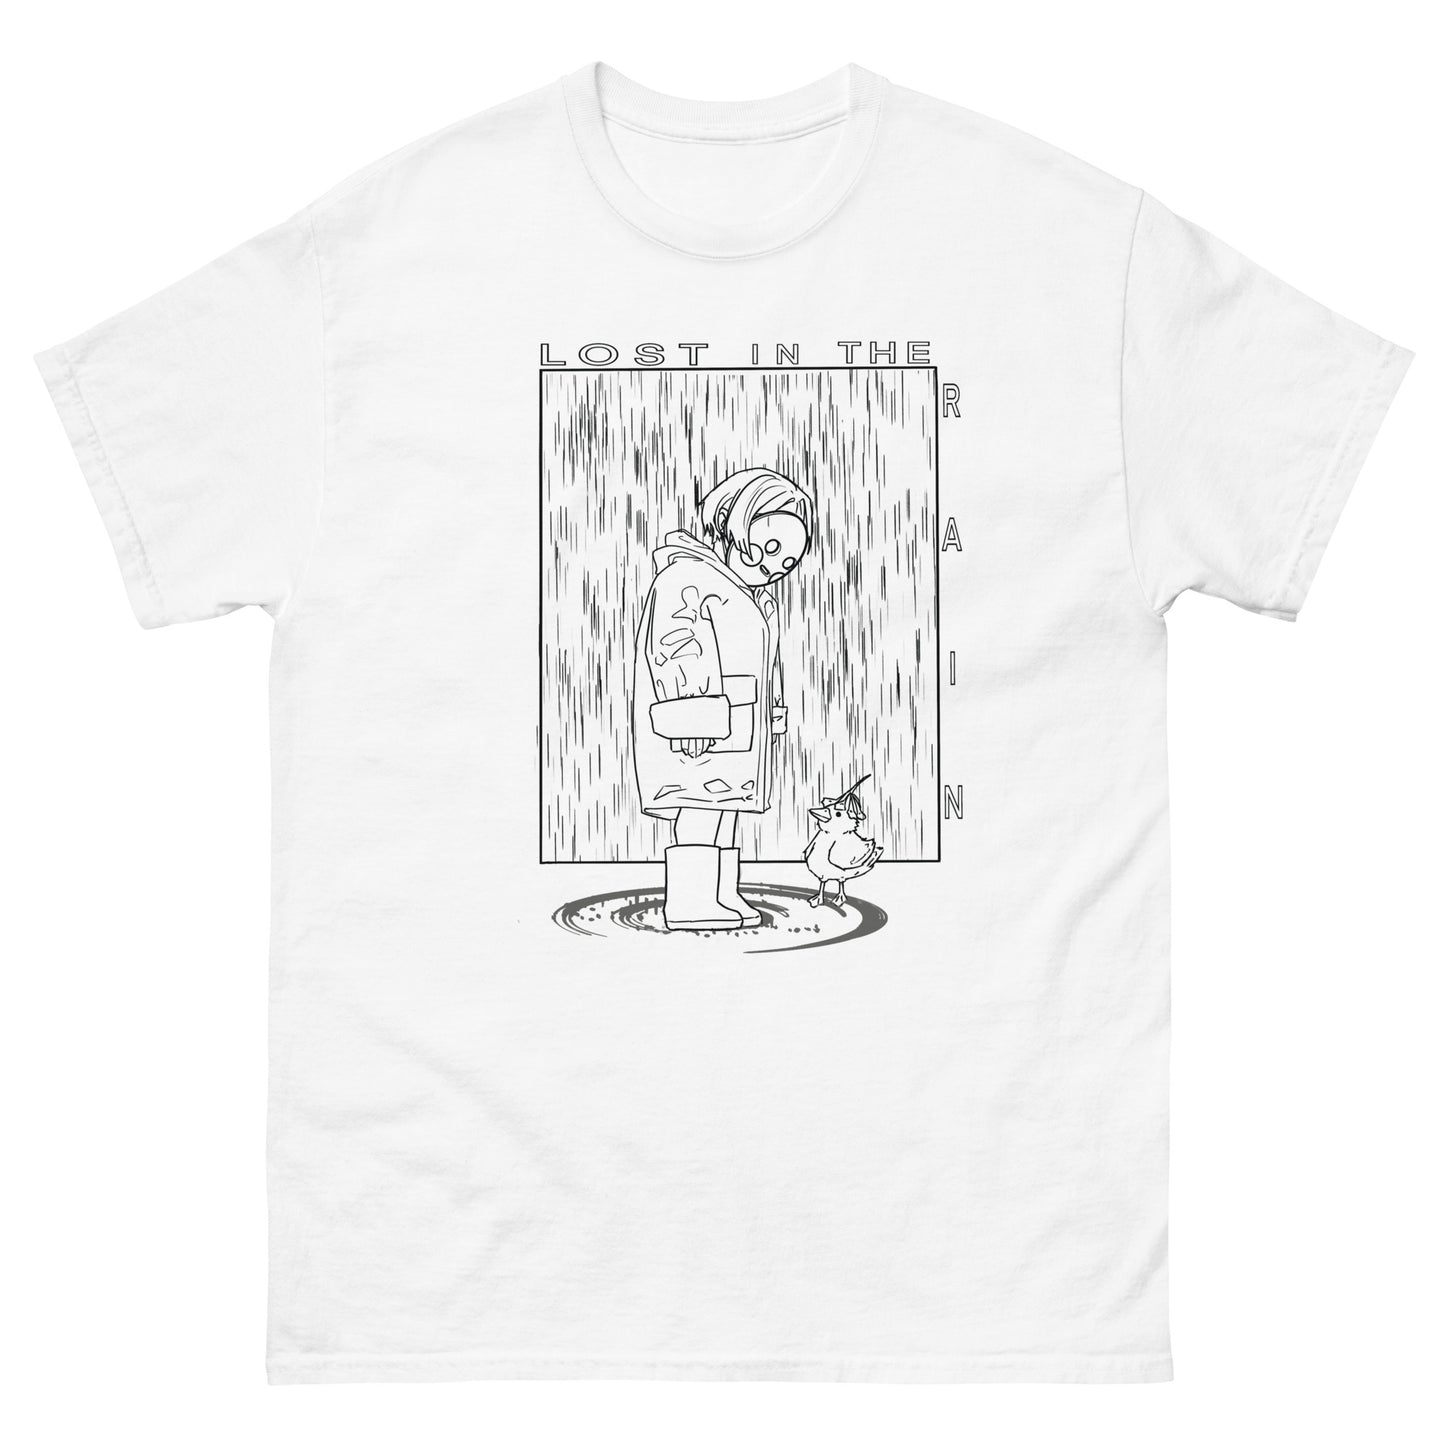 Ame Outline T-Shirt